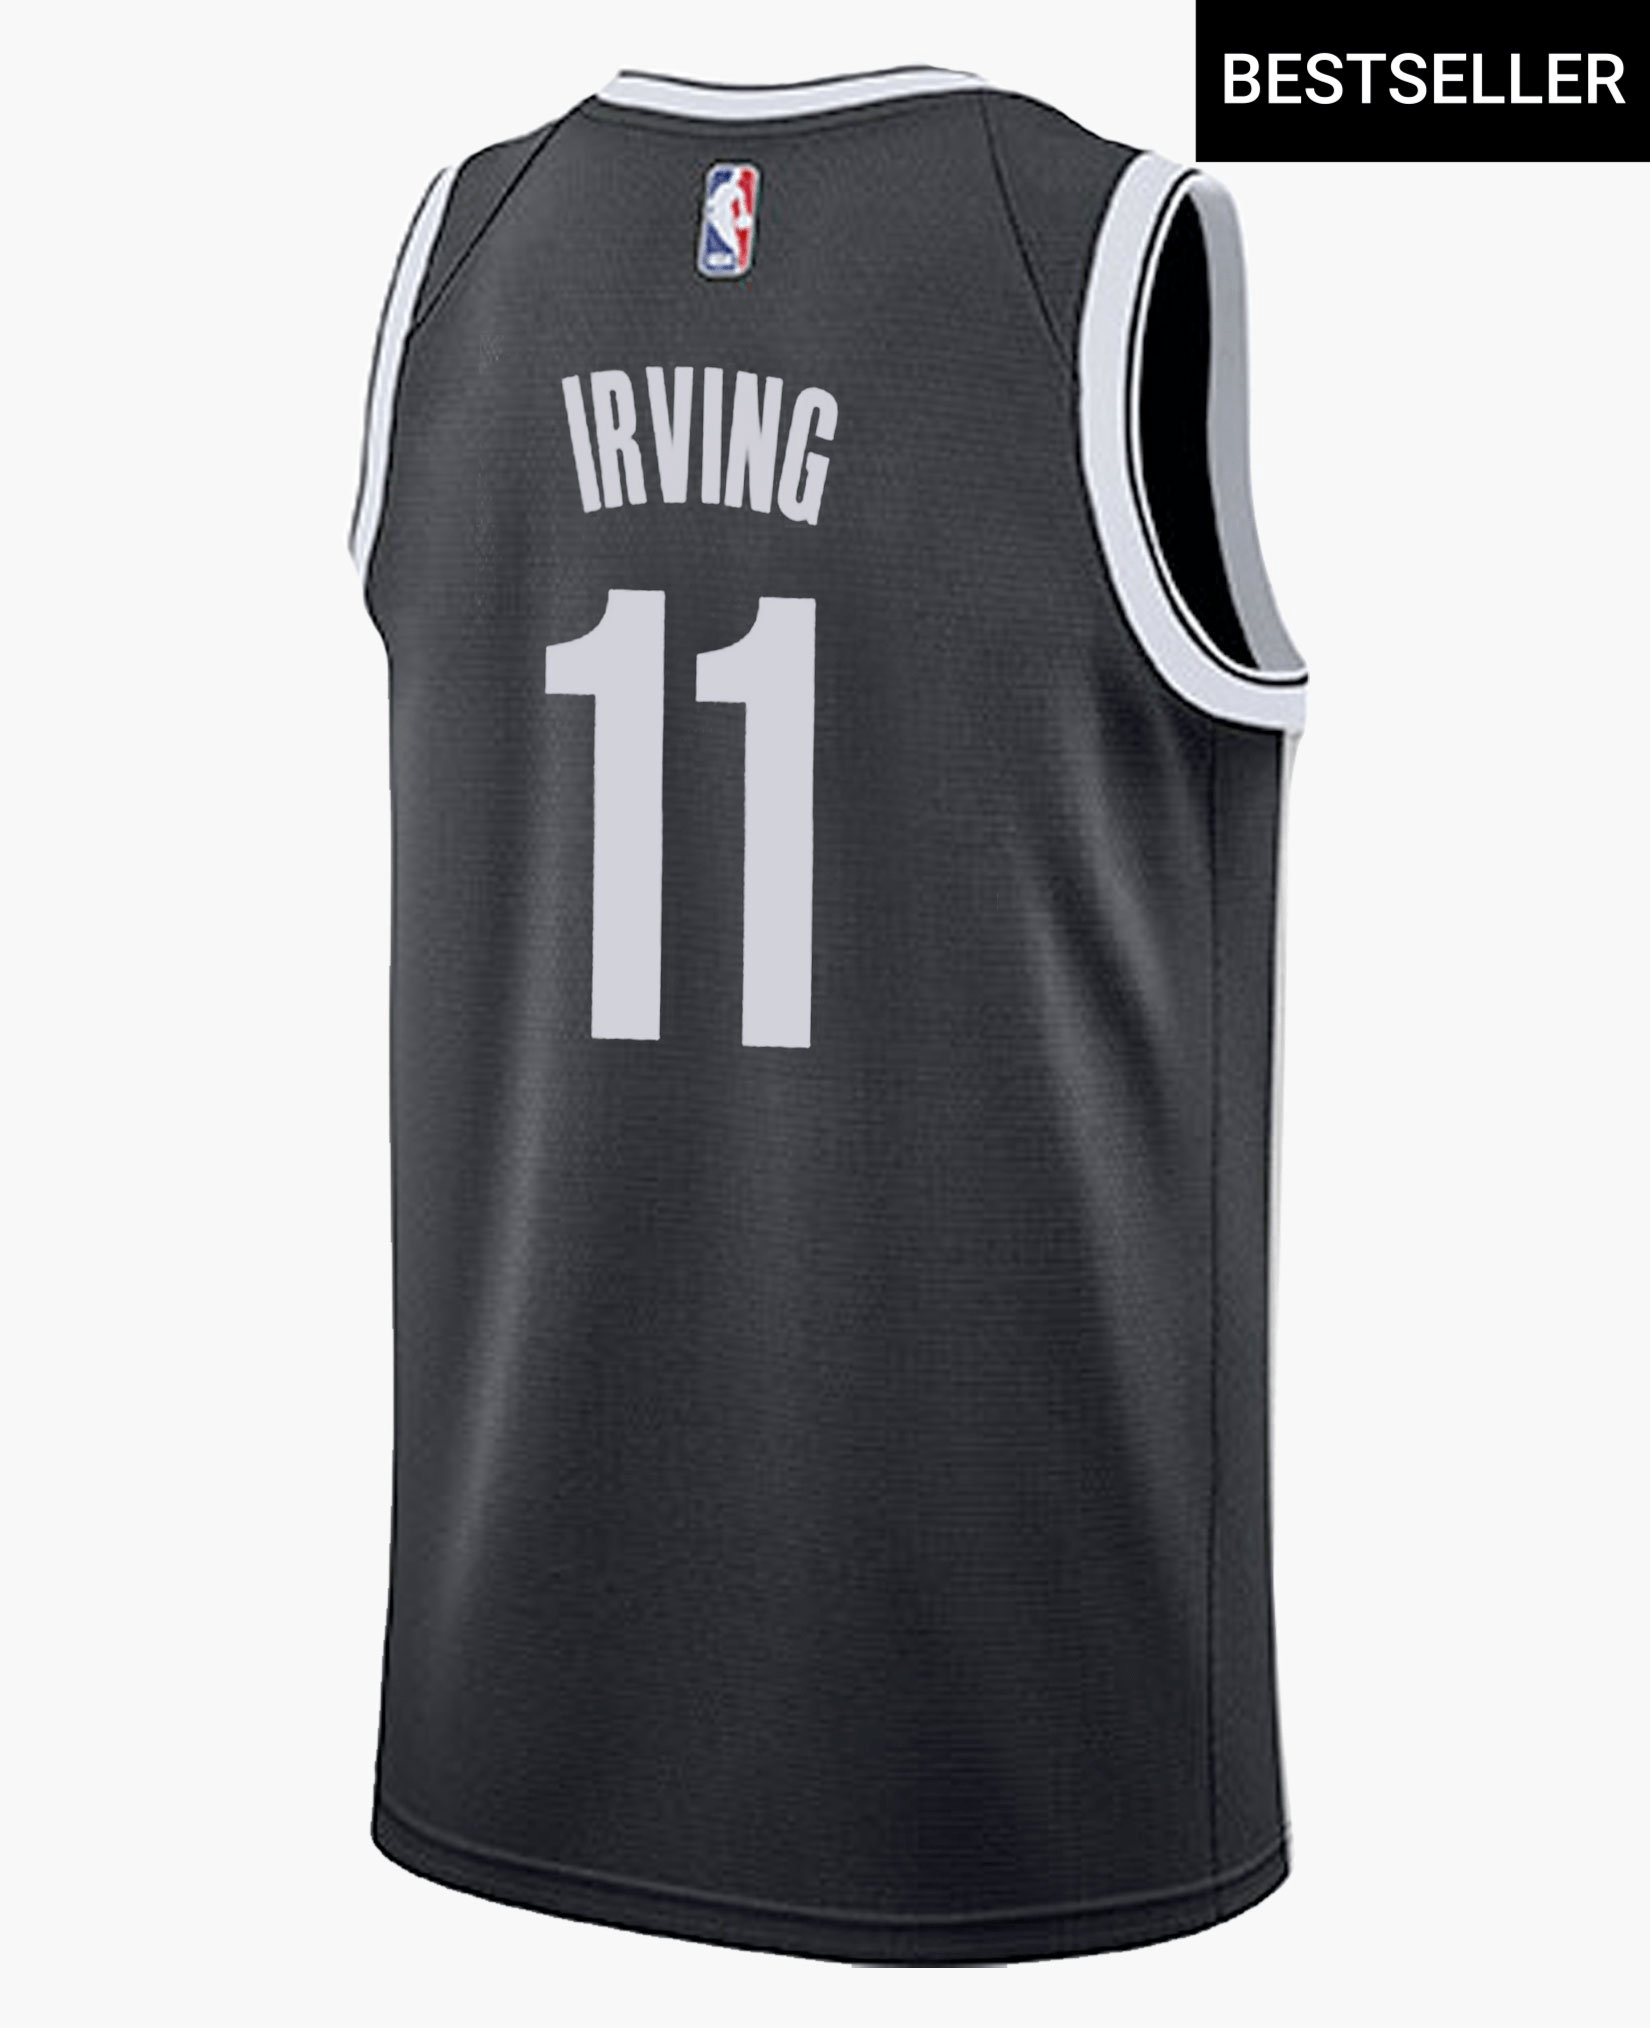 kyrie irving brooklyn nets youth jersey